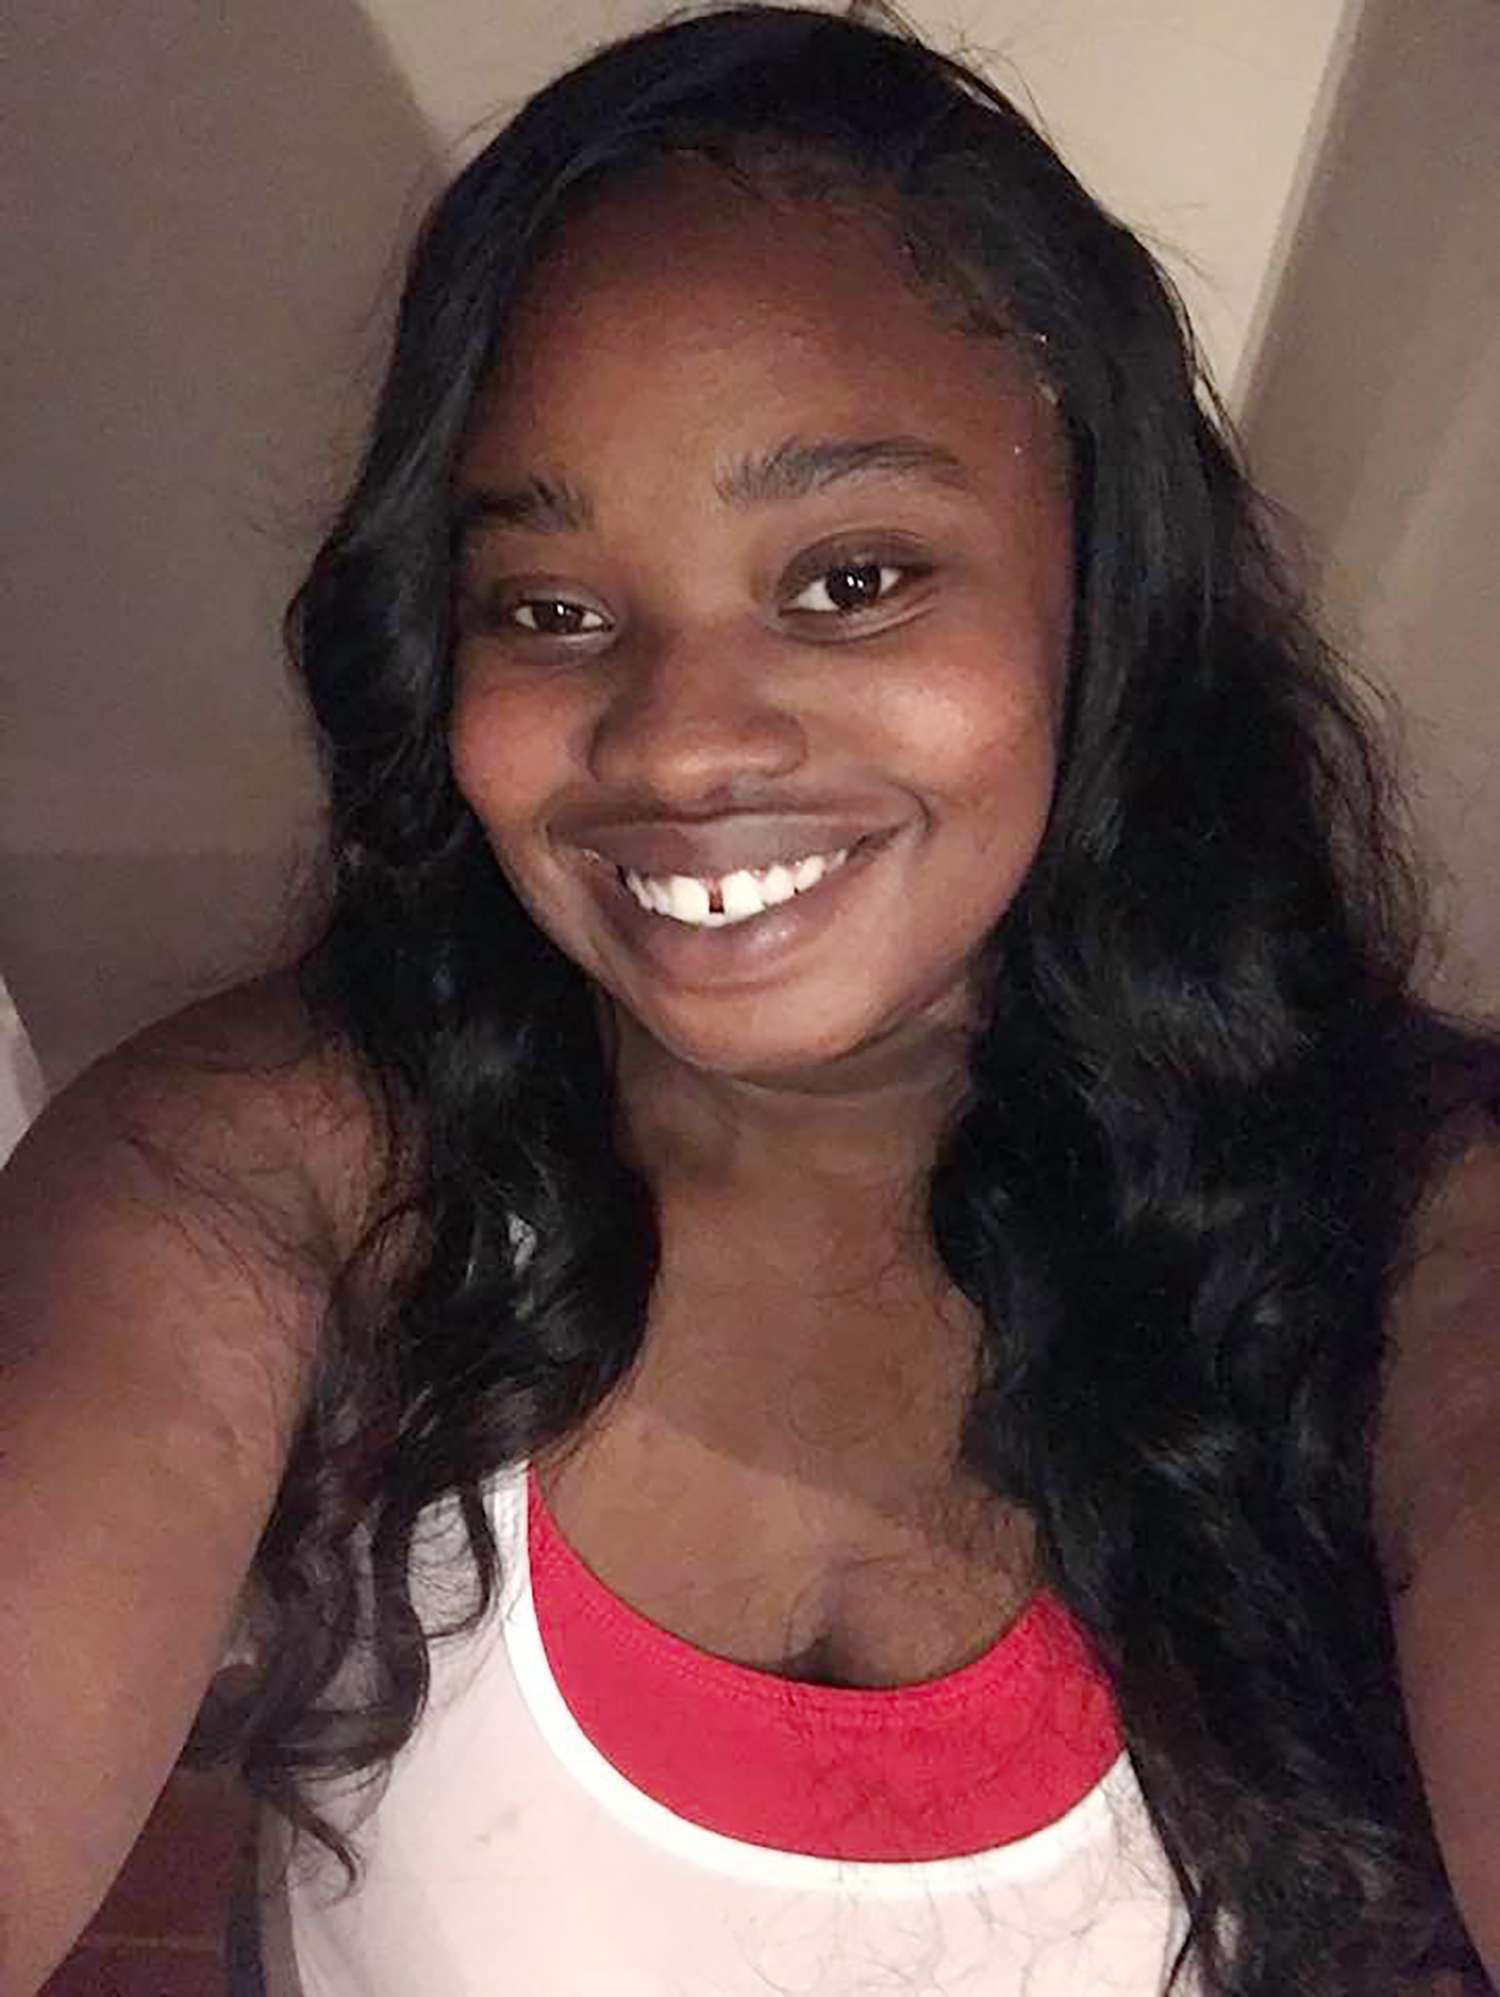 28-Year-Old Georgia Woman Dies After Suffering Fatal Injuries While in Police Custody